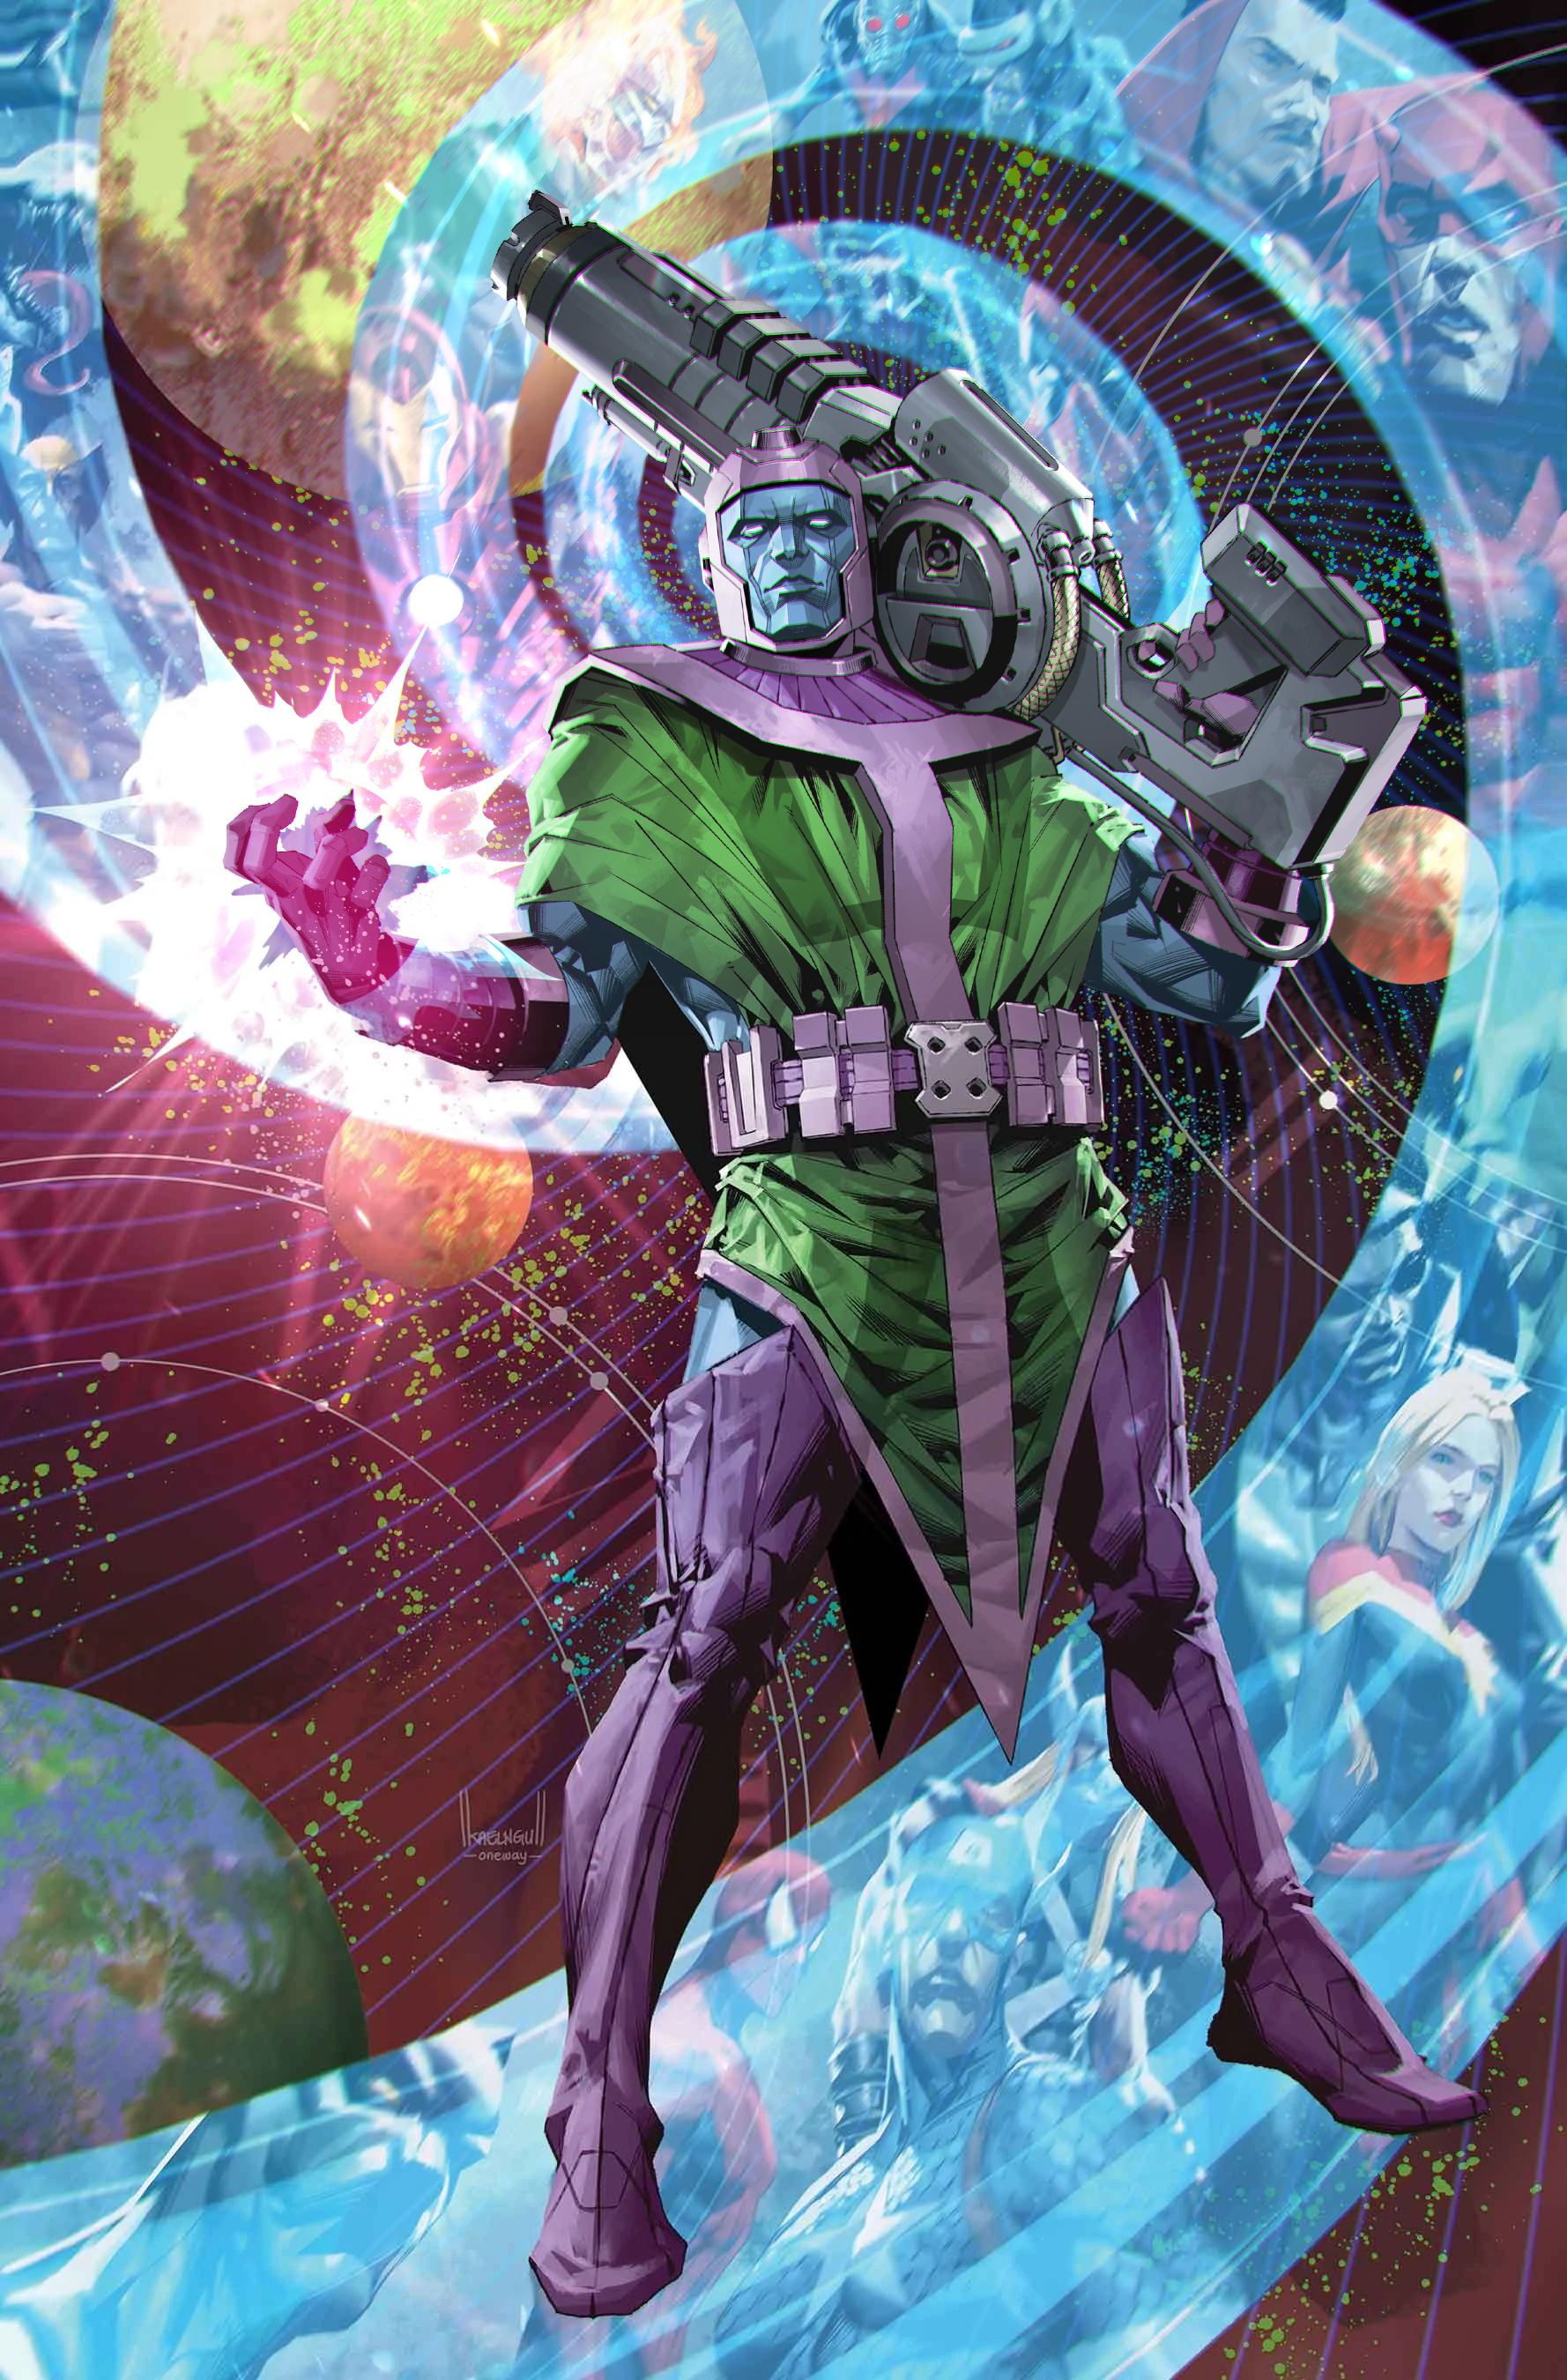 How may the Kang Dynasty storyline affect upcoming Avengers movies